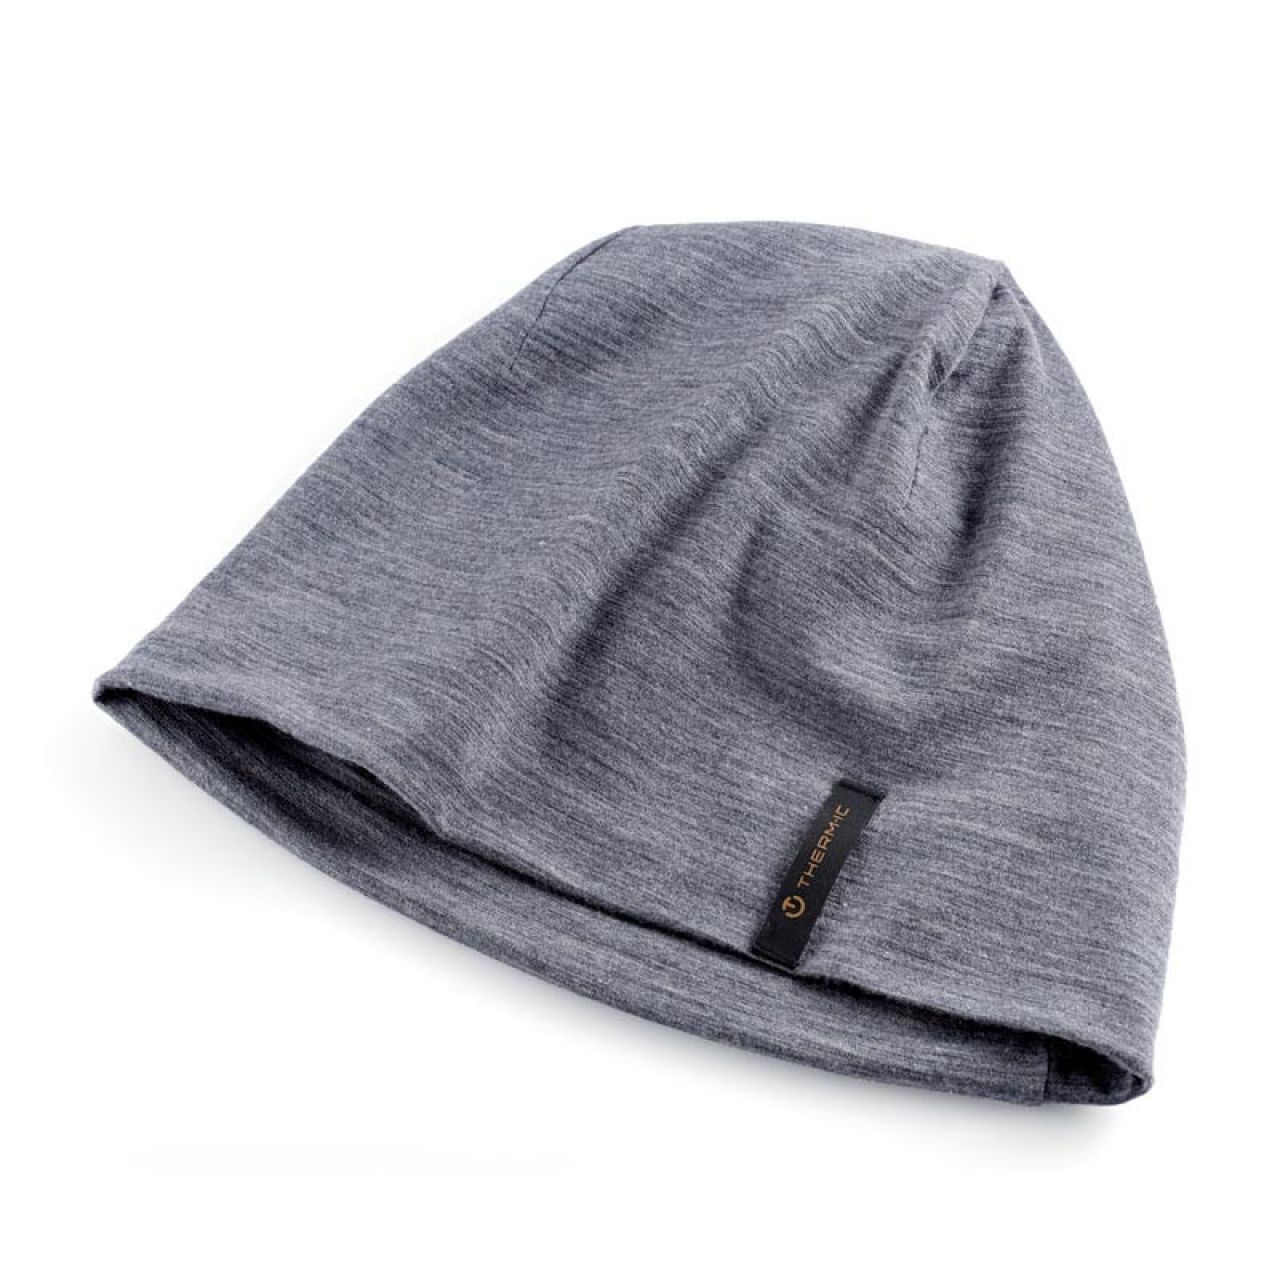 THERMIC TEMPERATE ULTRA LIGHT NATURAL BEANIE GREY Bonnet sport